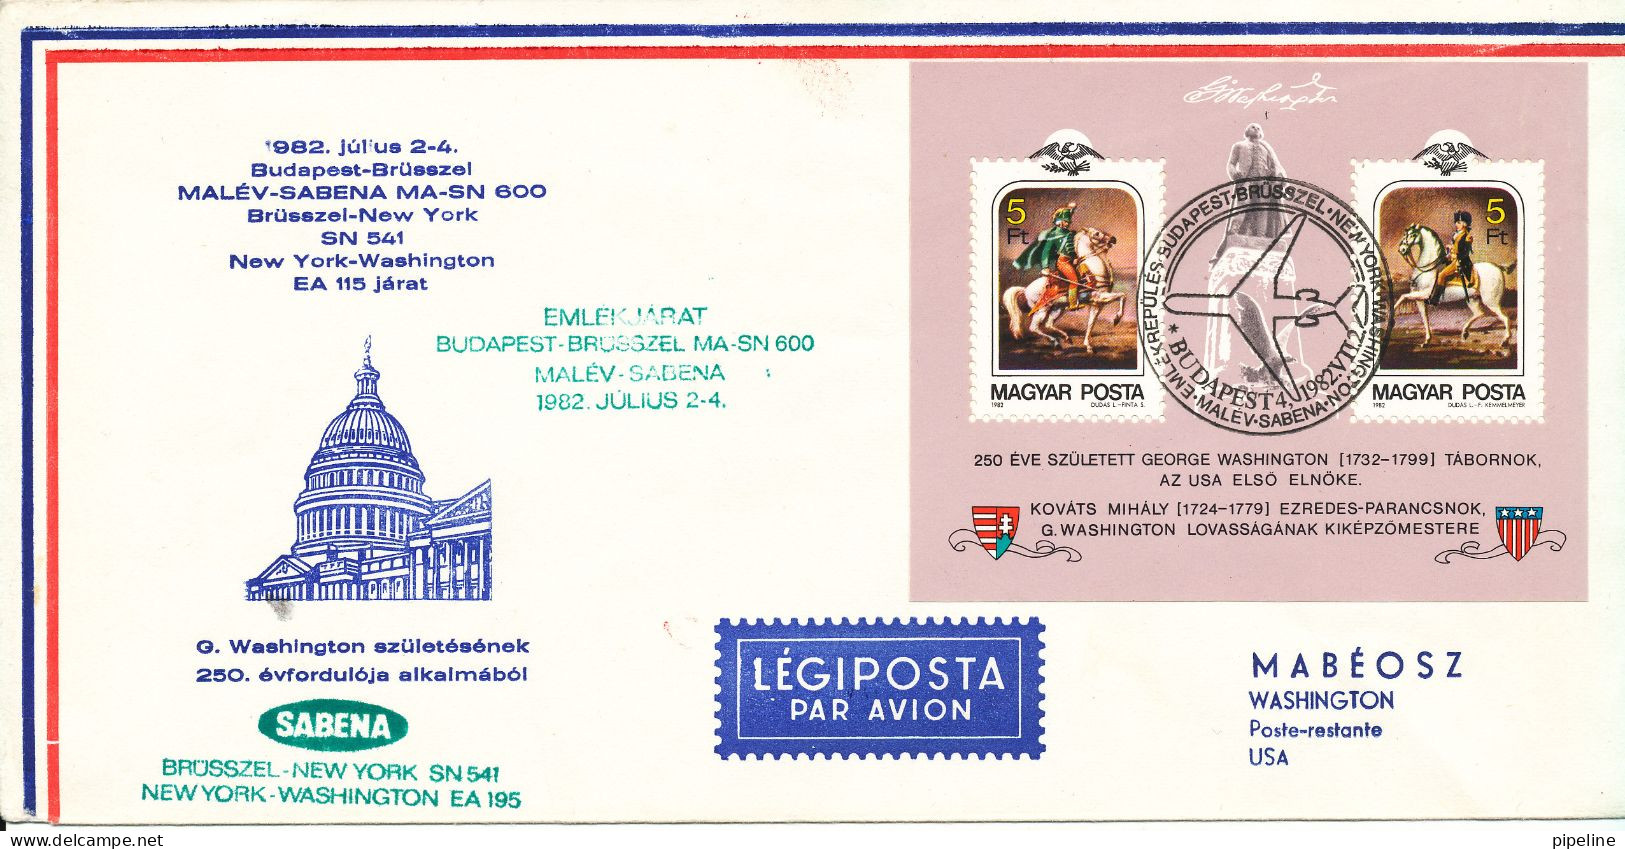 Hungary Air Mail Cover Special Flight Malev Sabena Budapest- Bruxelles - New York - Washington 2-7-1982 With Cachet - Covers & Documents